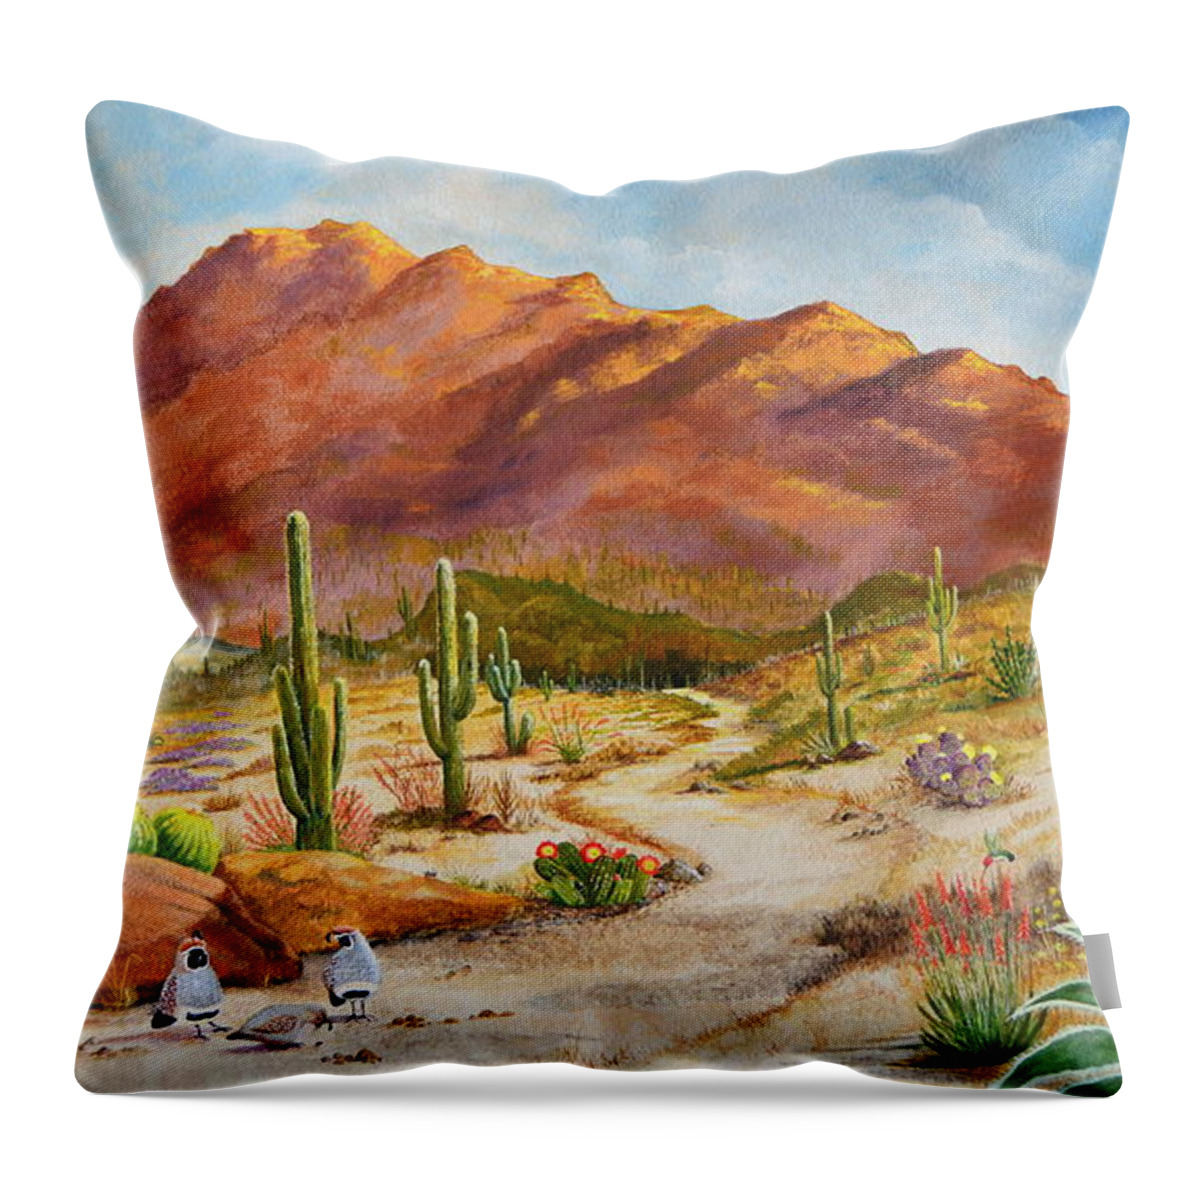 Desert Scene Throw Pillow featuring the painting Trail To The San Tans by Marilyn Smith